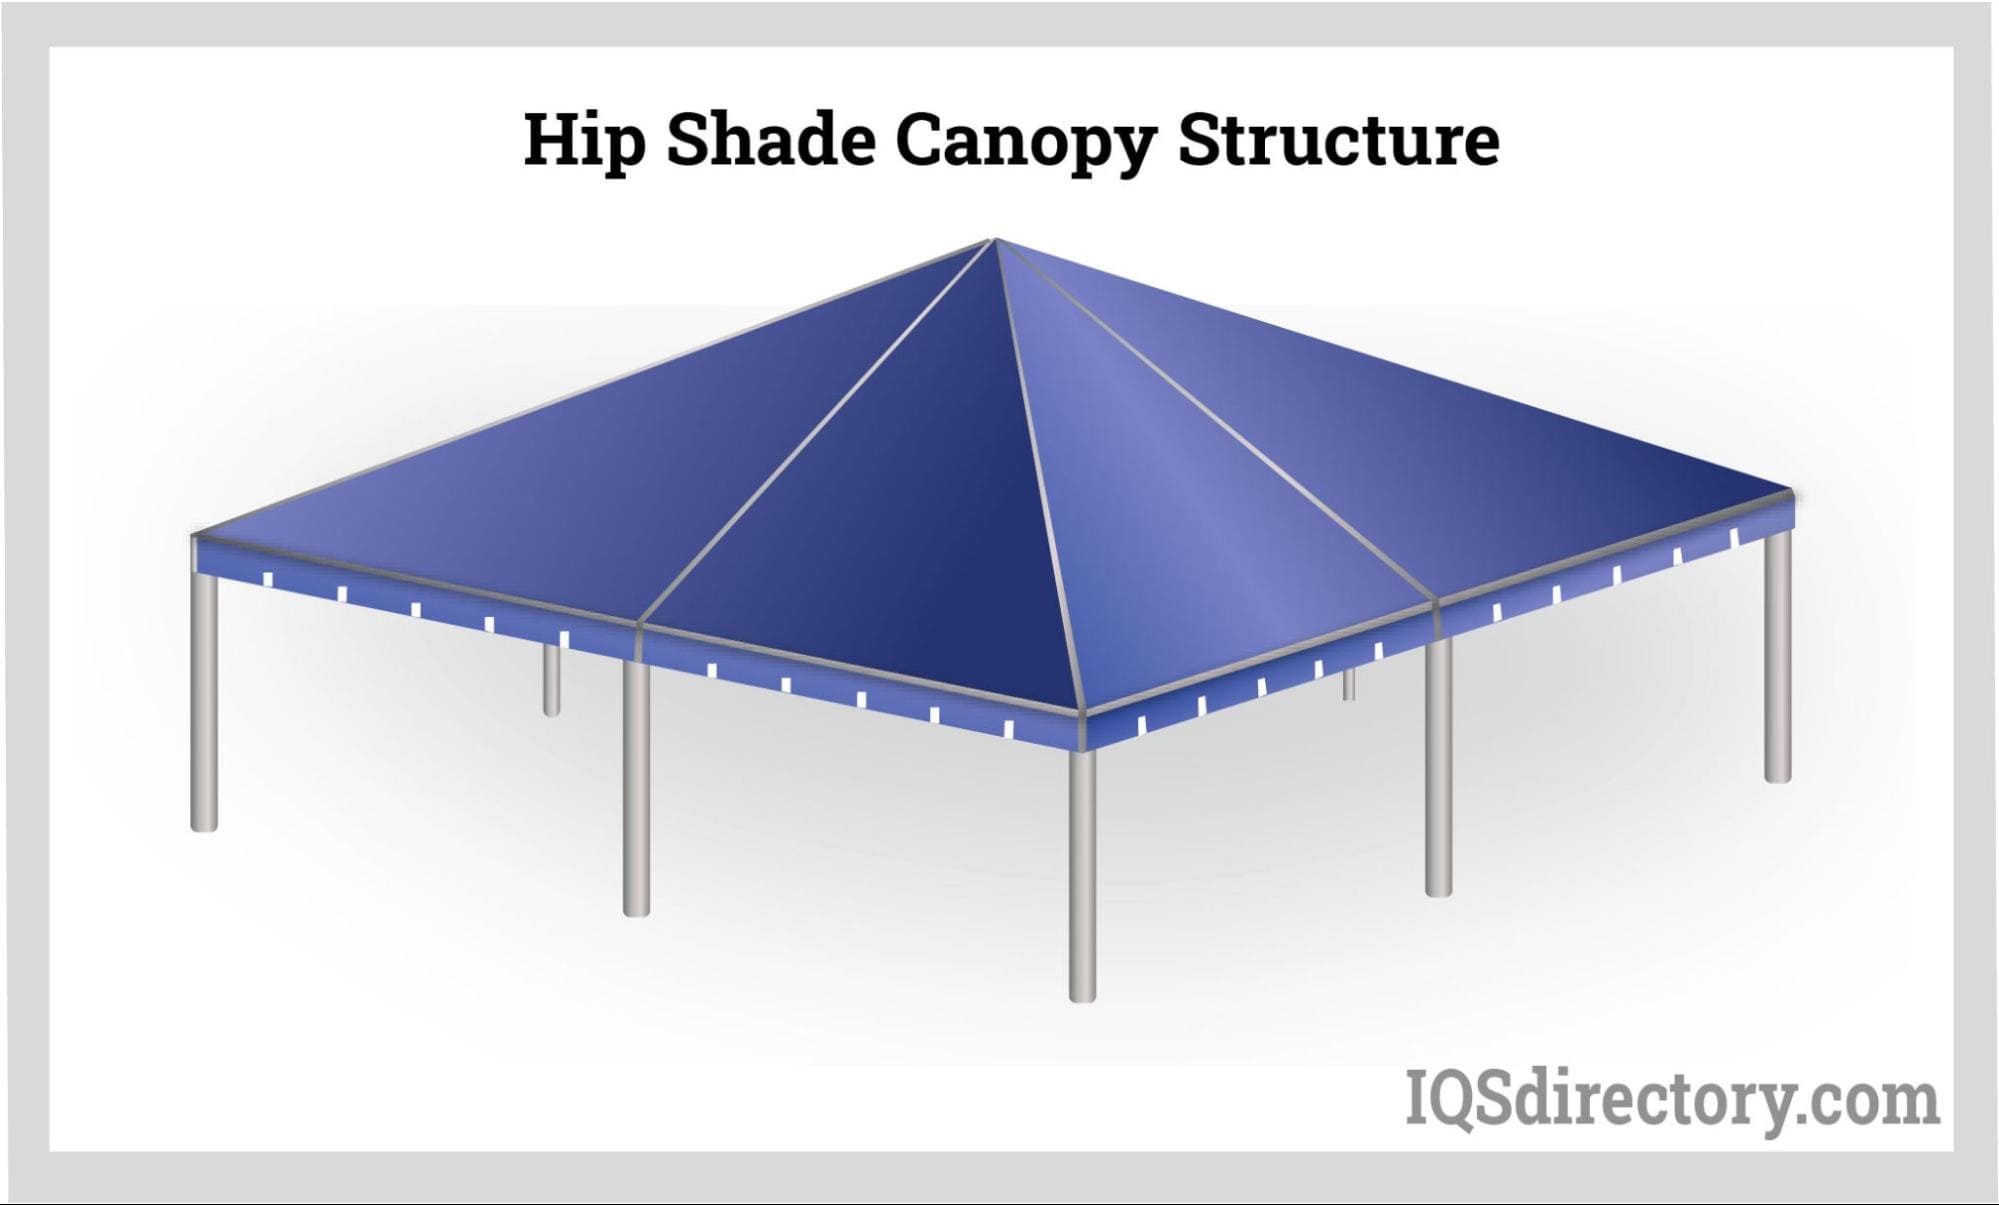  Hip Shade Canopy Structure